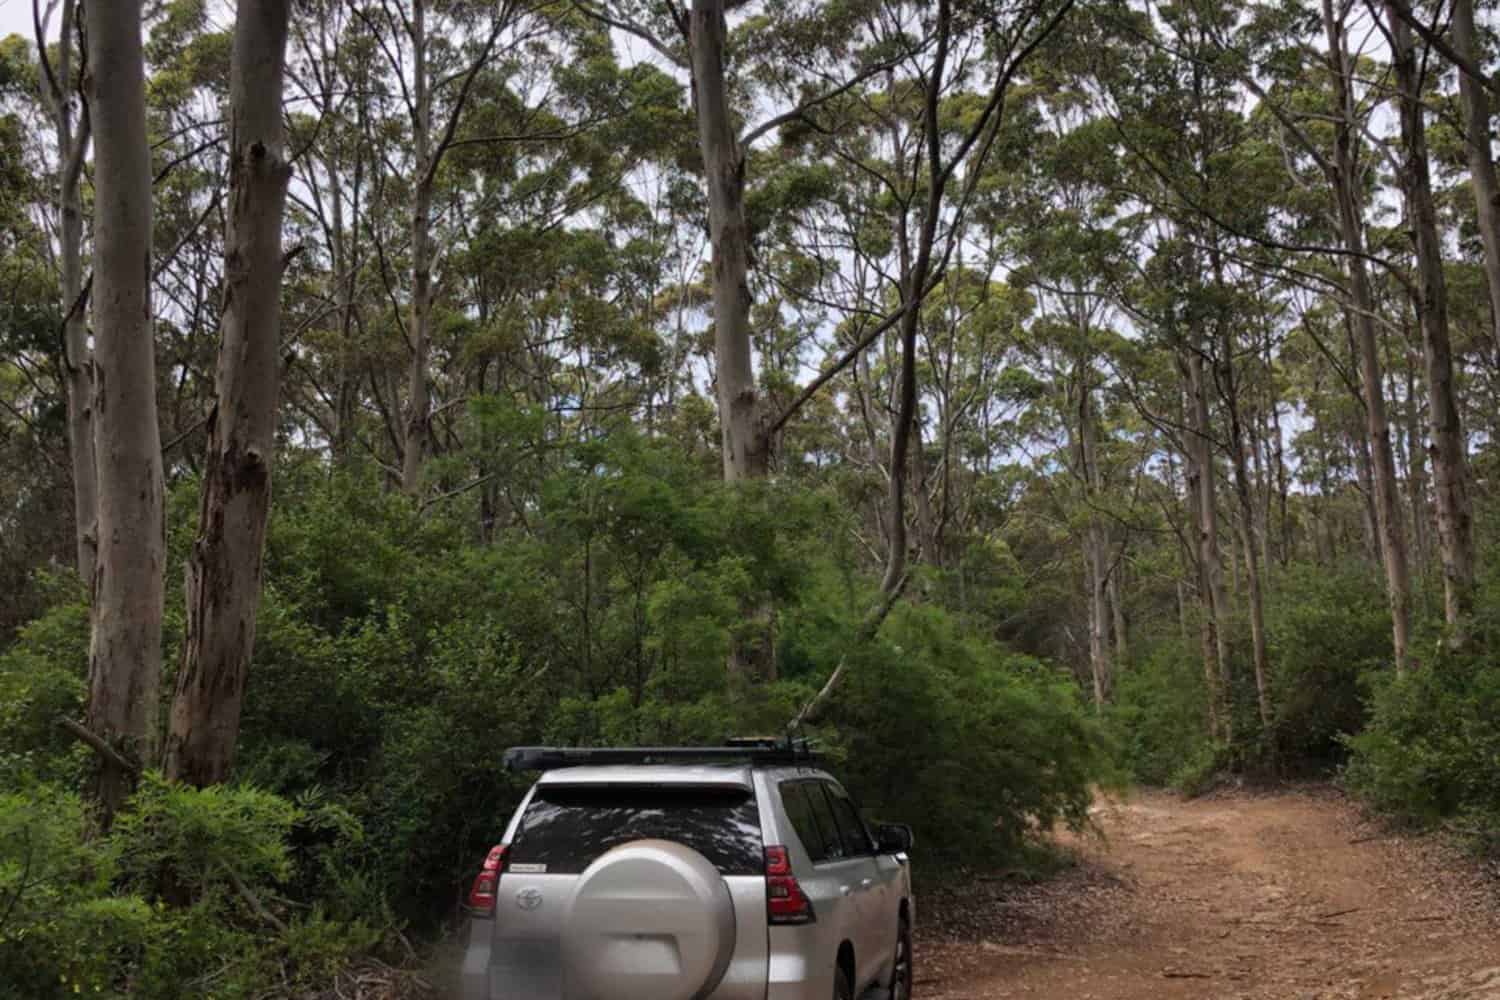 rent a car Perth parked in the Boranup forest Margaret River